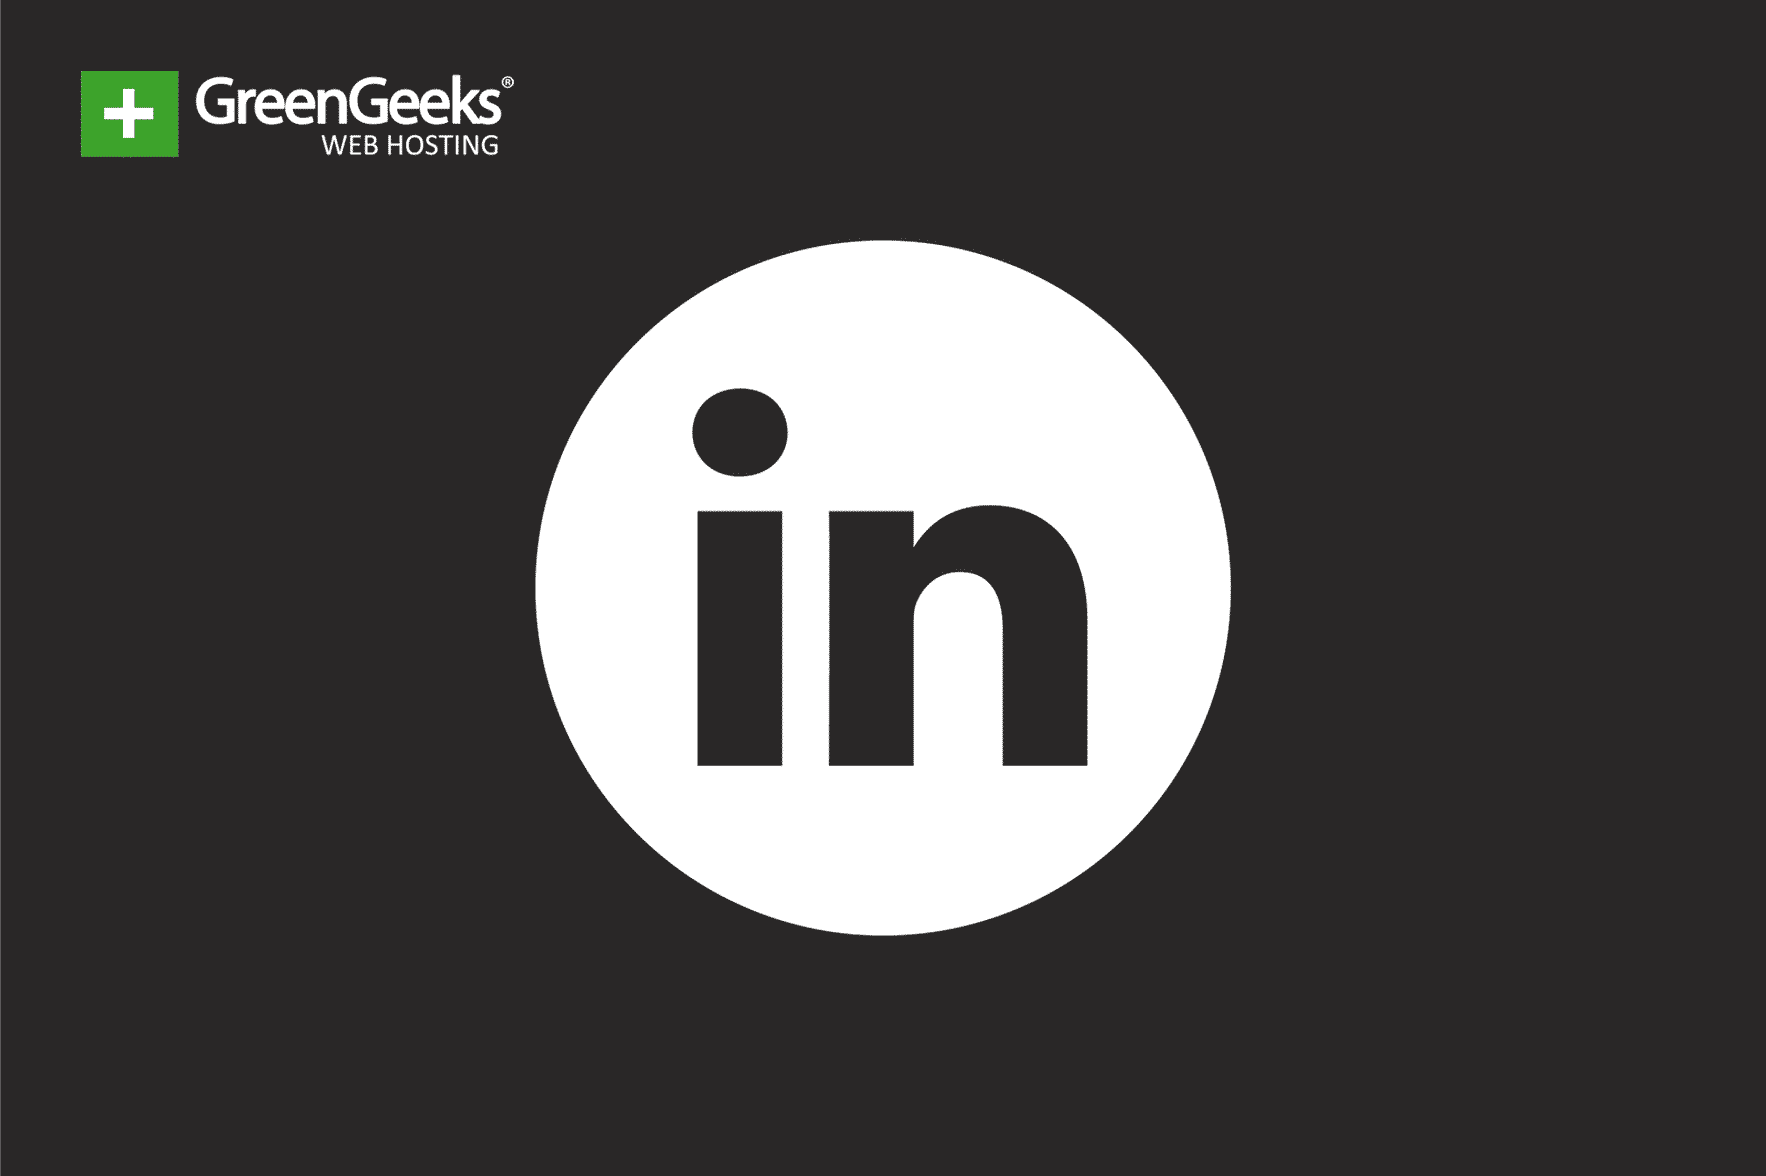 Linkedin Is Building With An Environmentally Friendly Concrete Internet Technology News - adam miller vp of engineering technology roblox crunchbase person profile